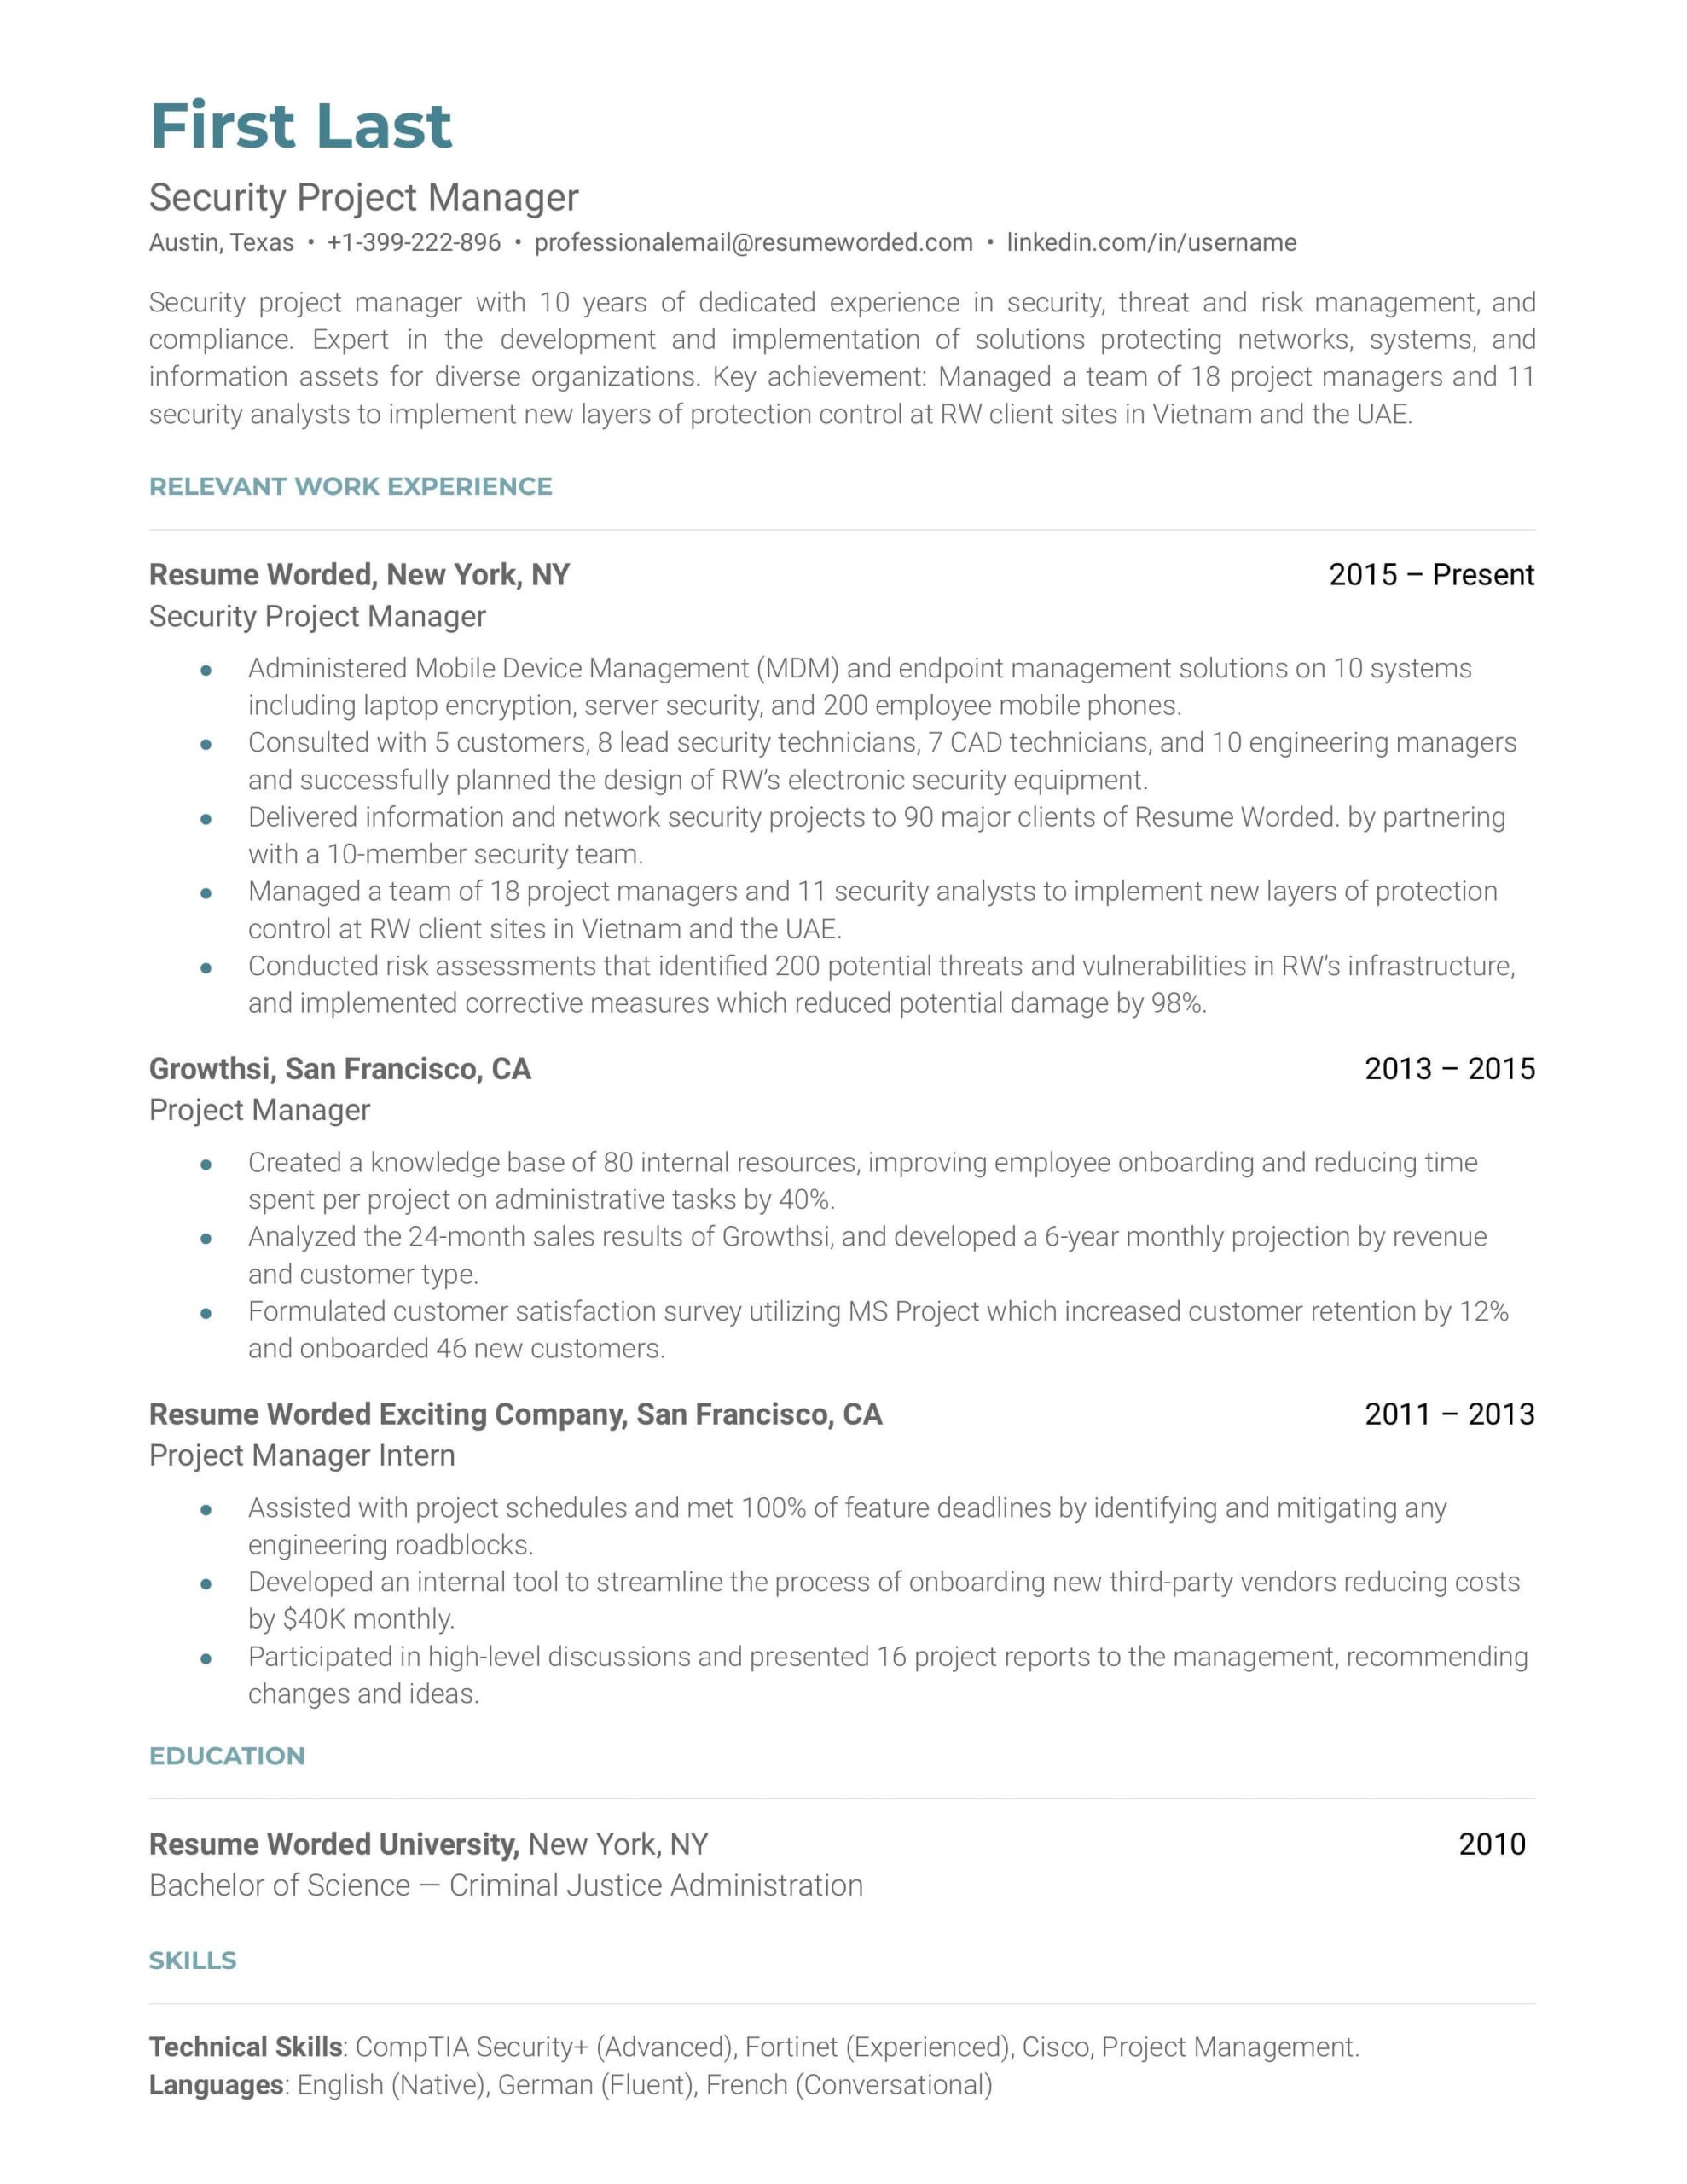 Sample Resume for Healthcare Project Manager Healthcare Project Manager Resume Example for 2022 Resume Worded